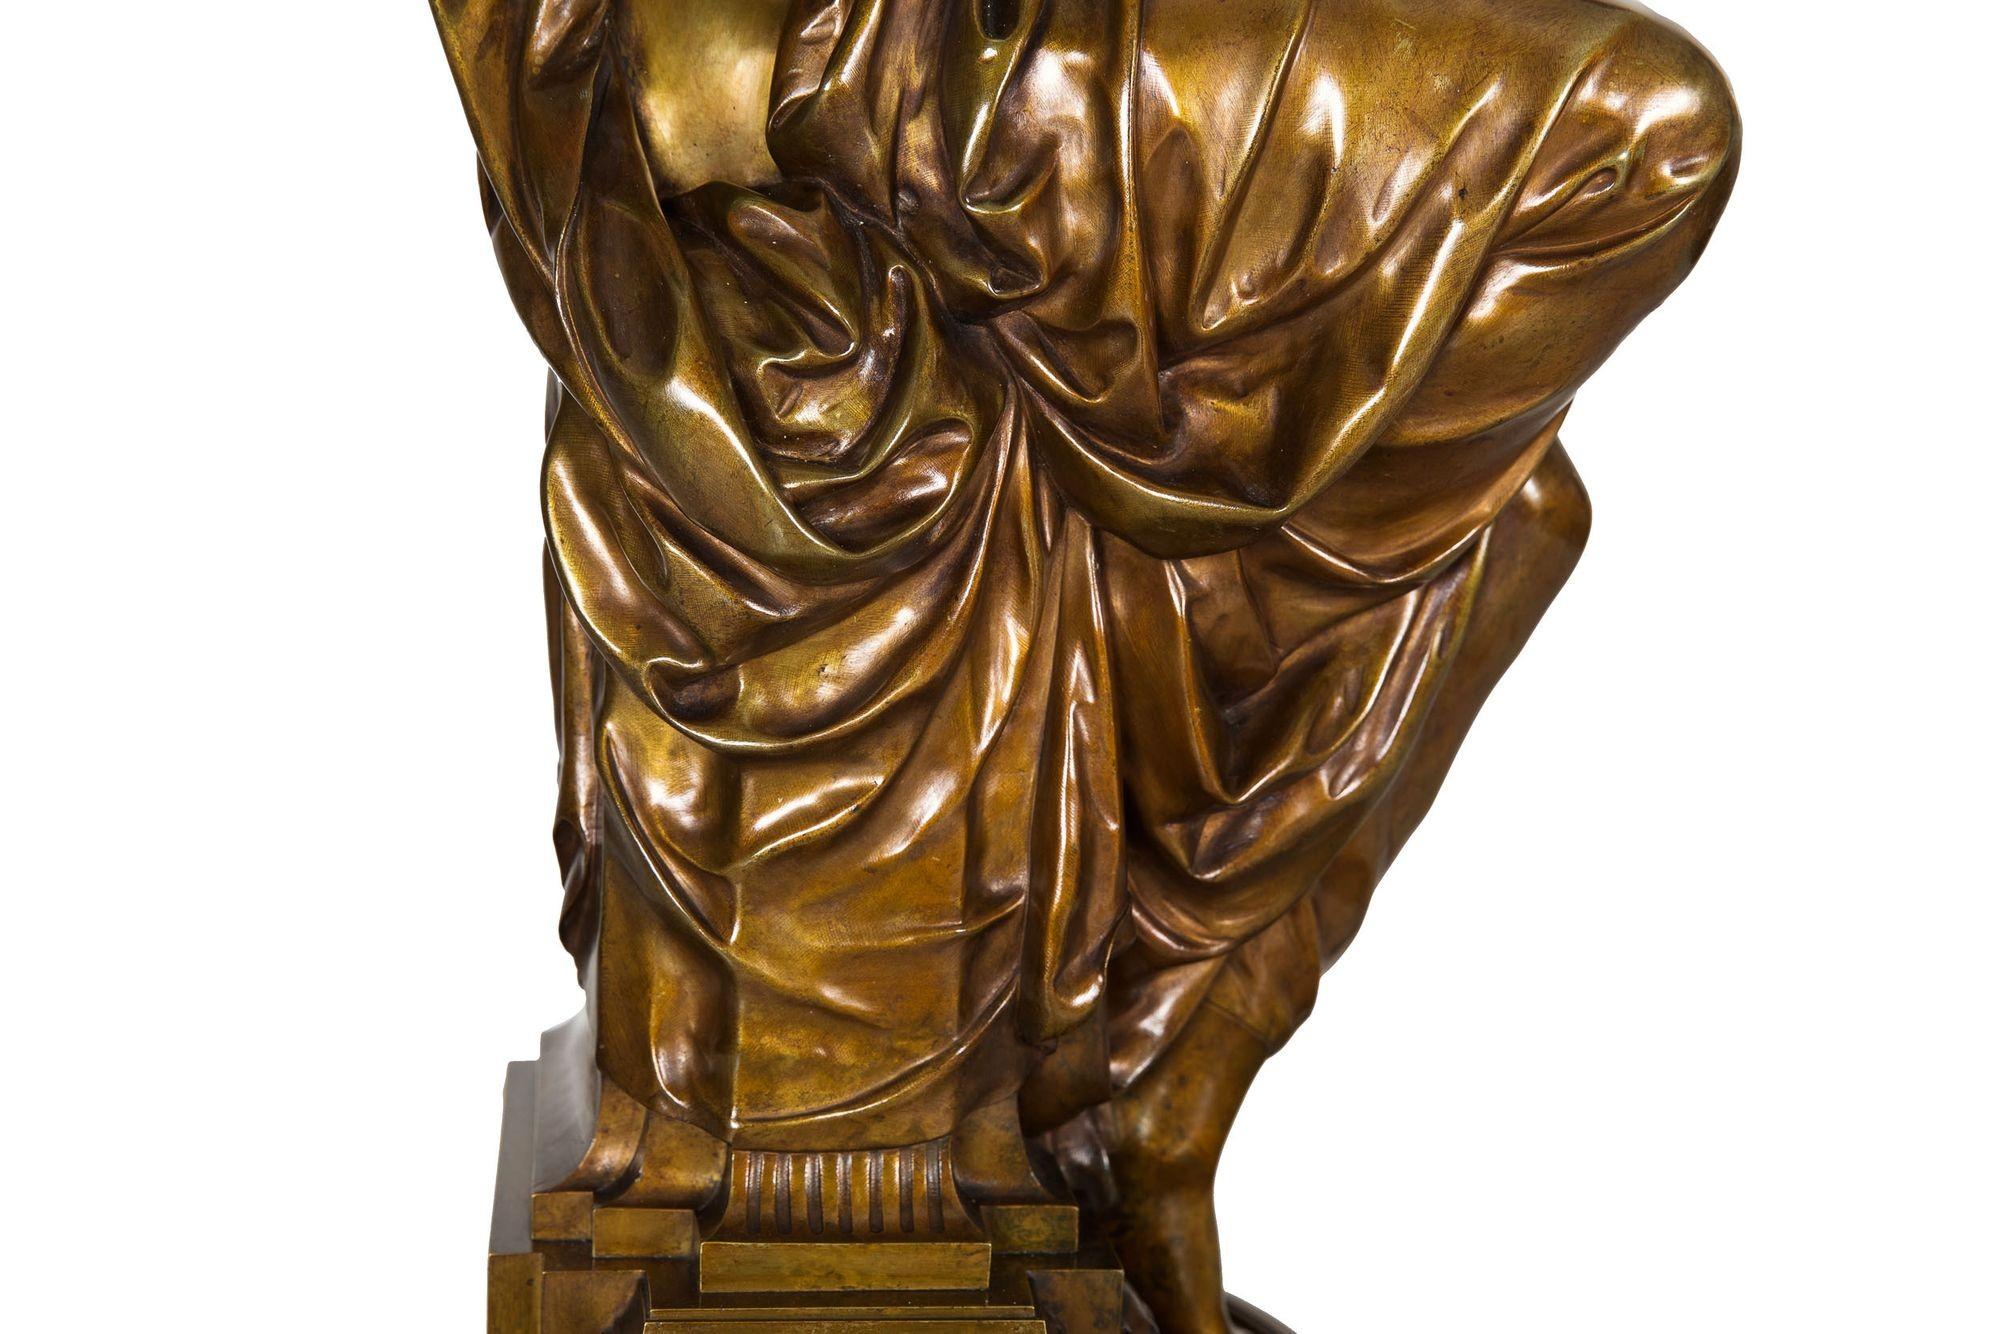 French Antique Bronze Sculpture “Seated Woman” by Etienne-Henri Dumaige, c.1880 For Sale 12